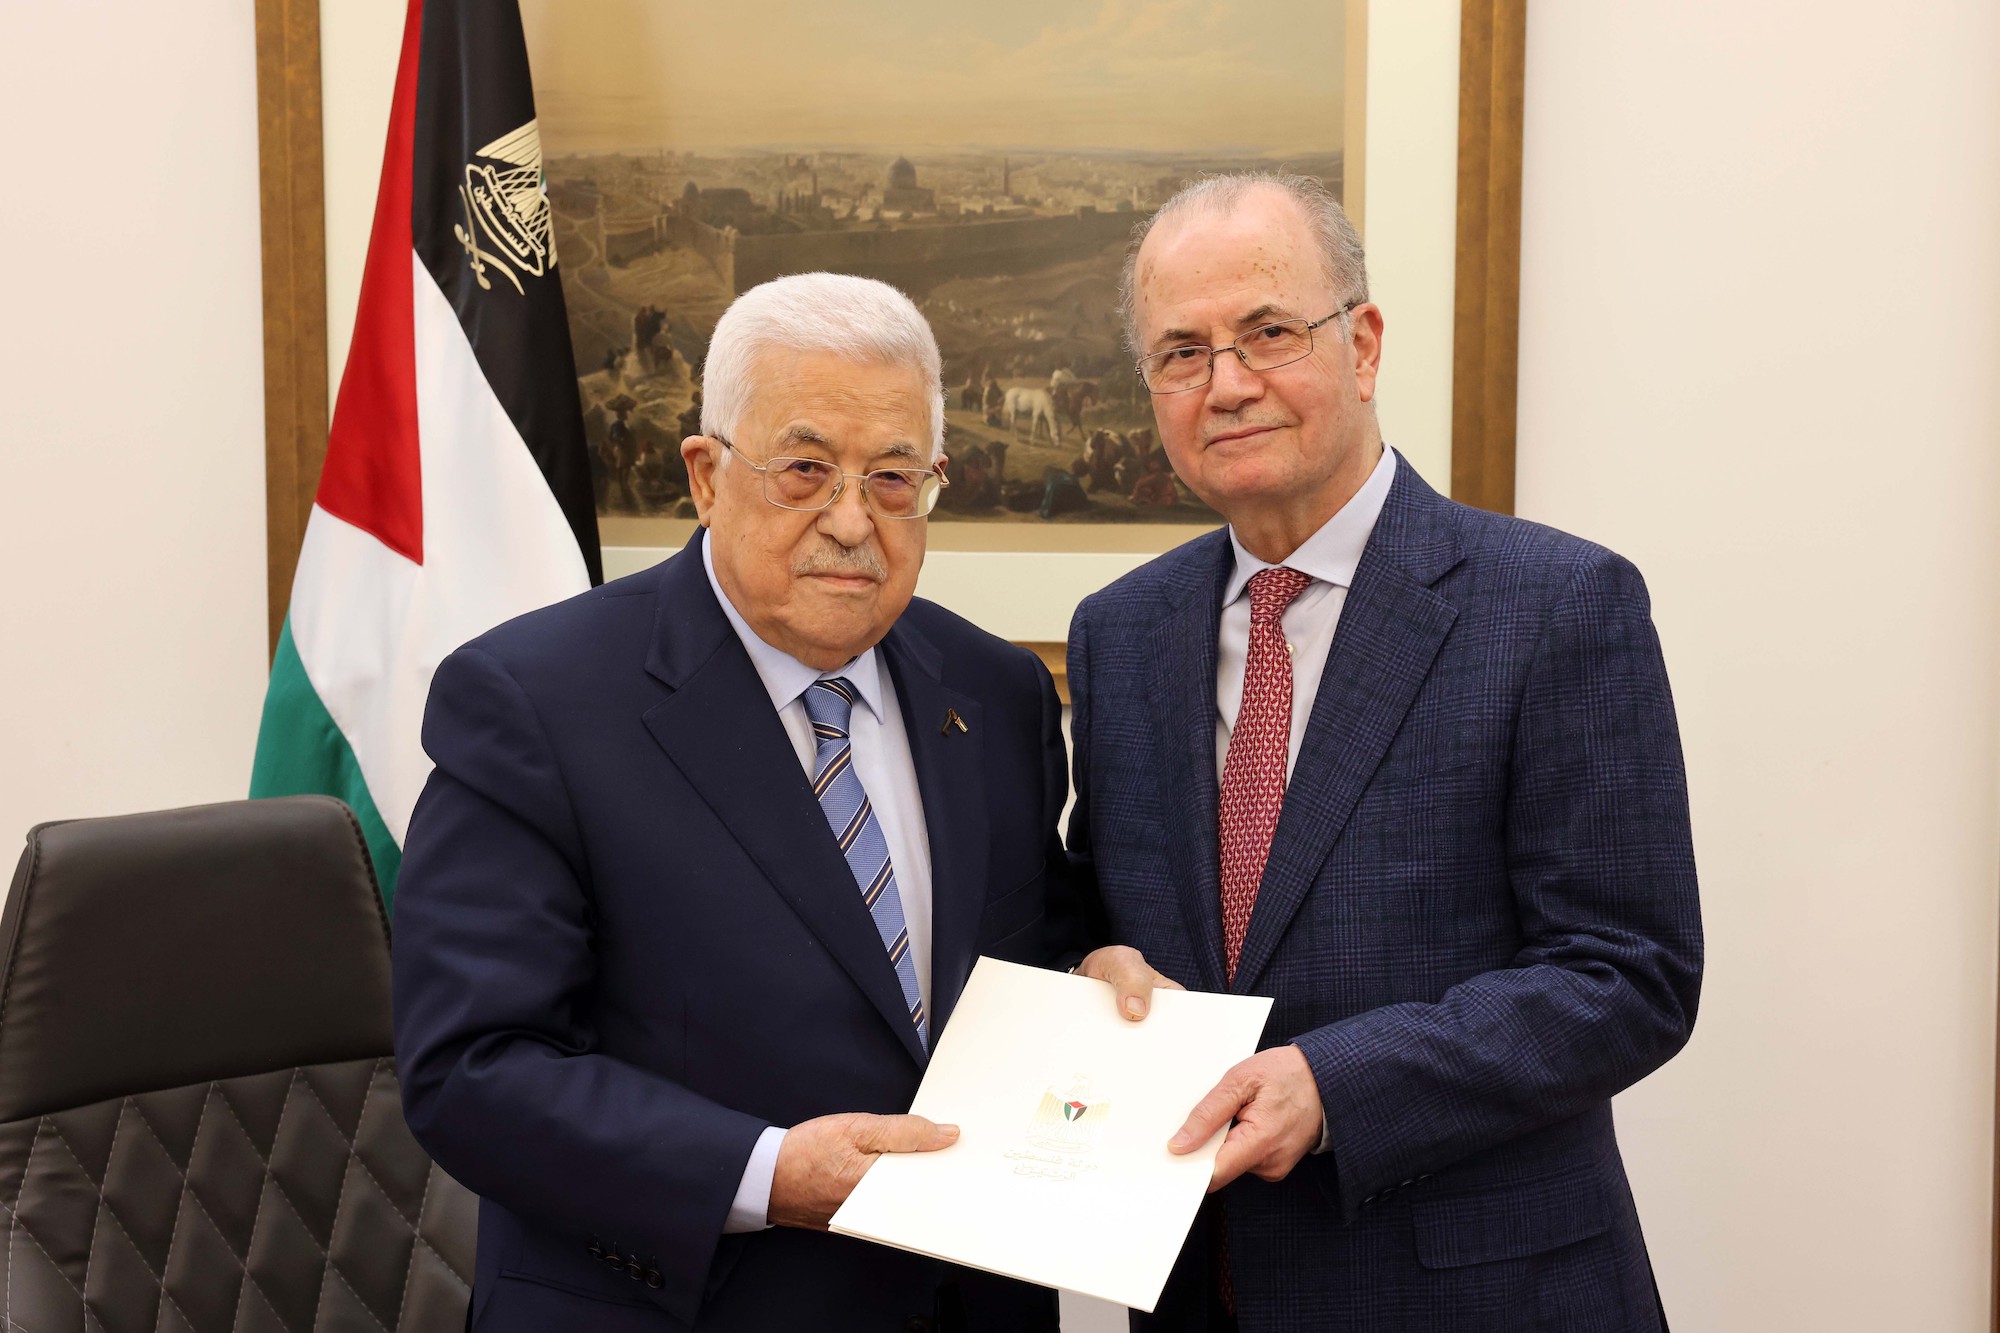 Palestinian President Mahmoud Abbas, left, poses for a photo with Mohammed Mustafa after appointing him as the new Prime Minister in Ramallah, West Bank, on Thursday.